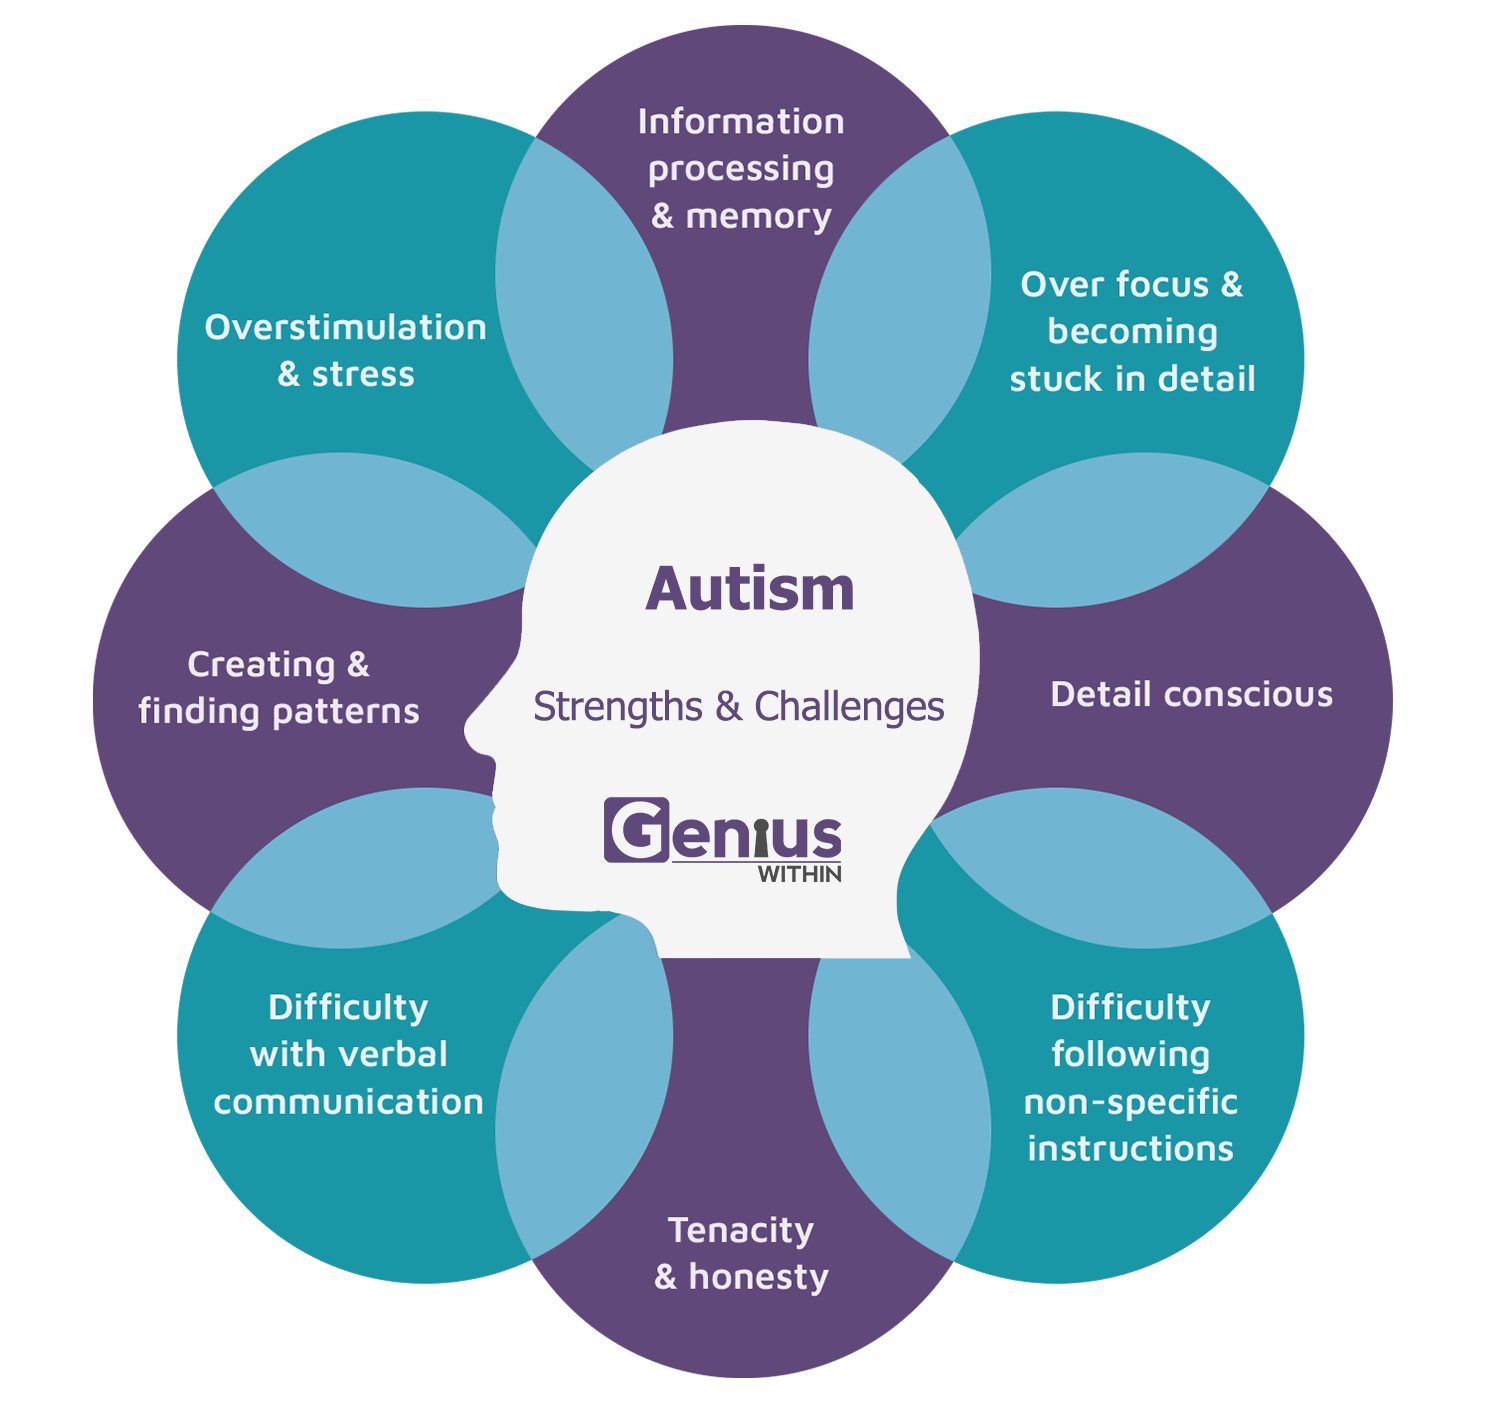 Info graphic with head at the centre and overlapping text bubbles in a circle around it. Title reads: Autism, stengths and challenges. The strengths and challenges are listed as follows; information processing and memory, over focus and becoming stuck in detail, detail conscious, difficulty following non-specific instructions, tenacity and honesty, difficulty with verbal communication, creating and finding patterns, overstimulation and stress.